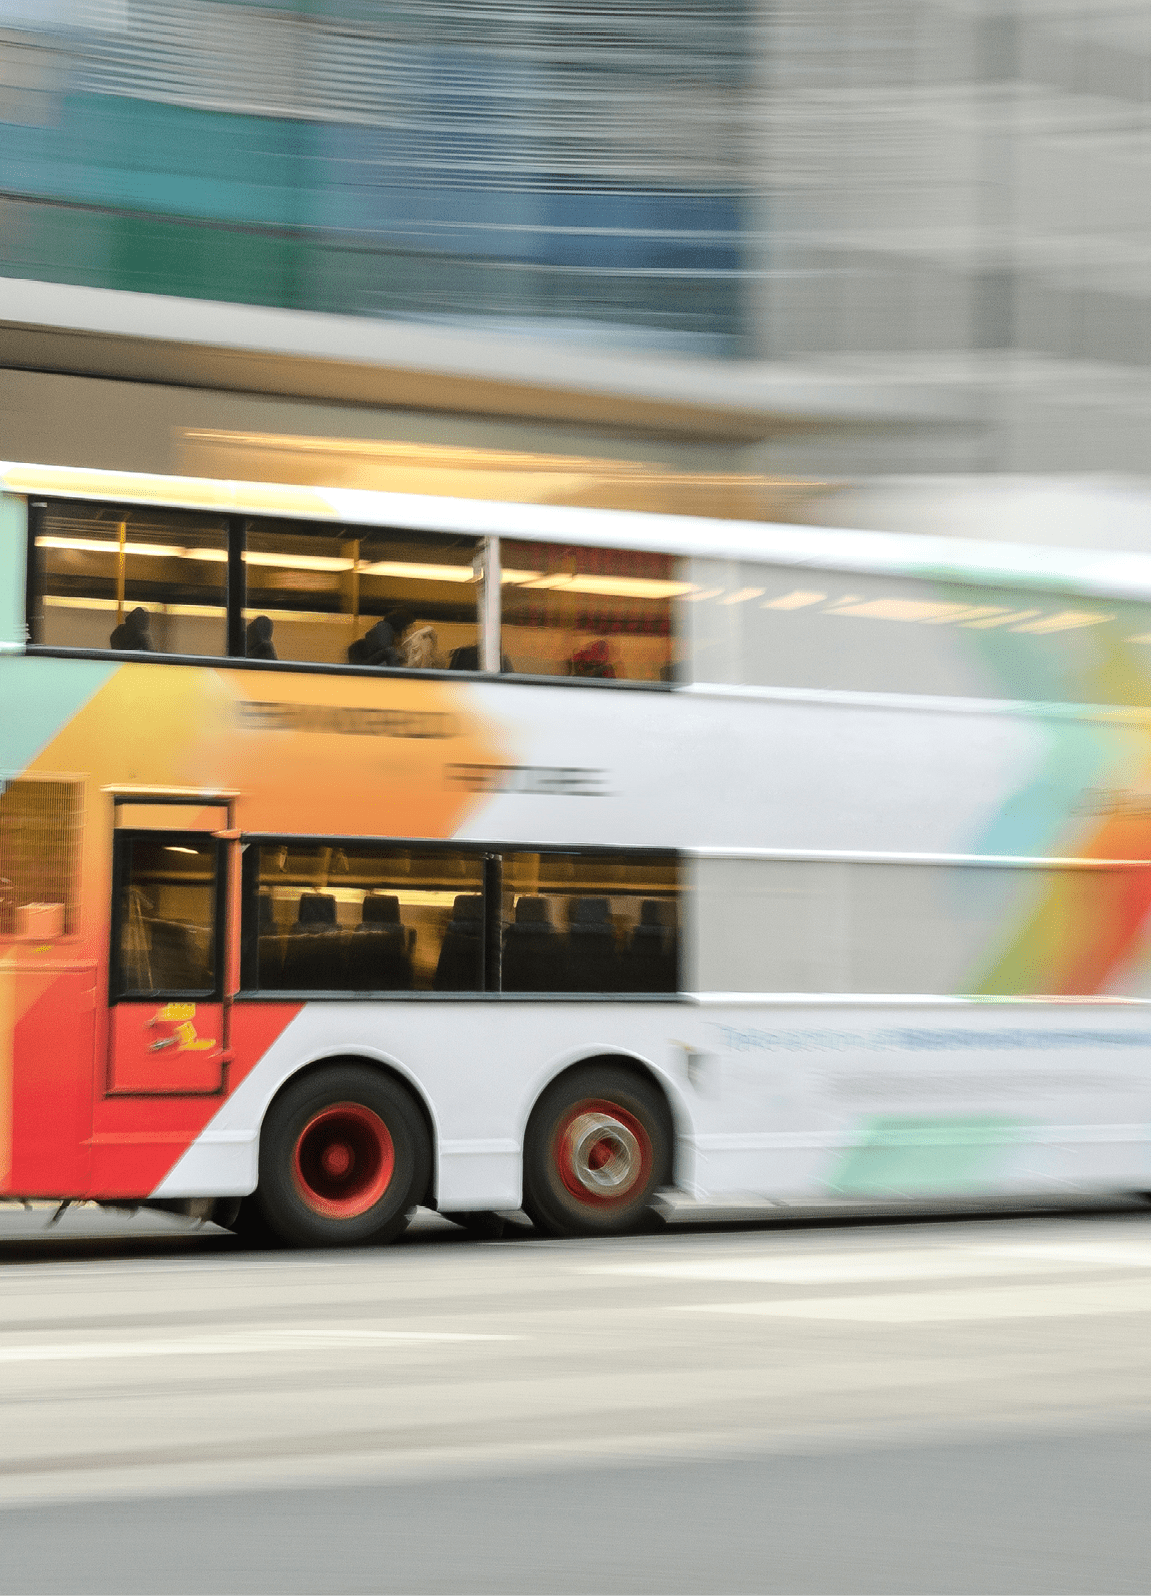 Great motion blur image to symbolize the need for urban transportation